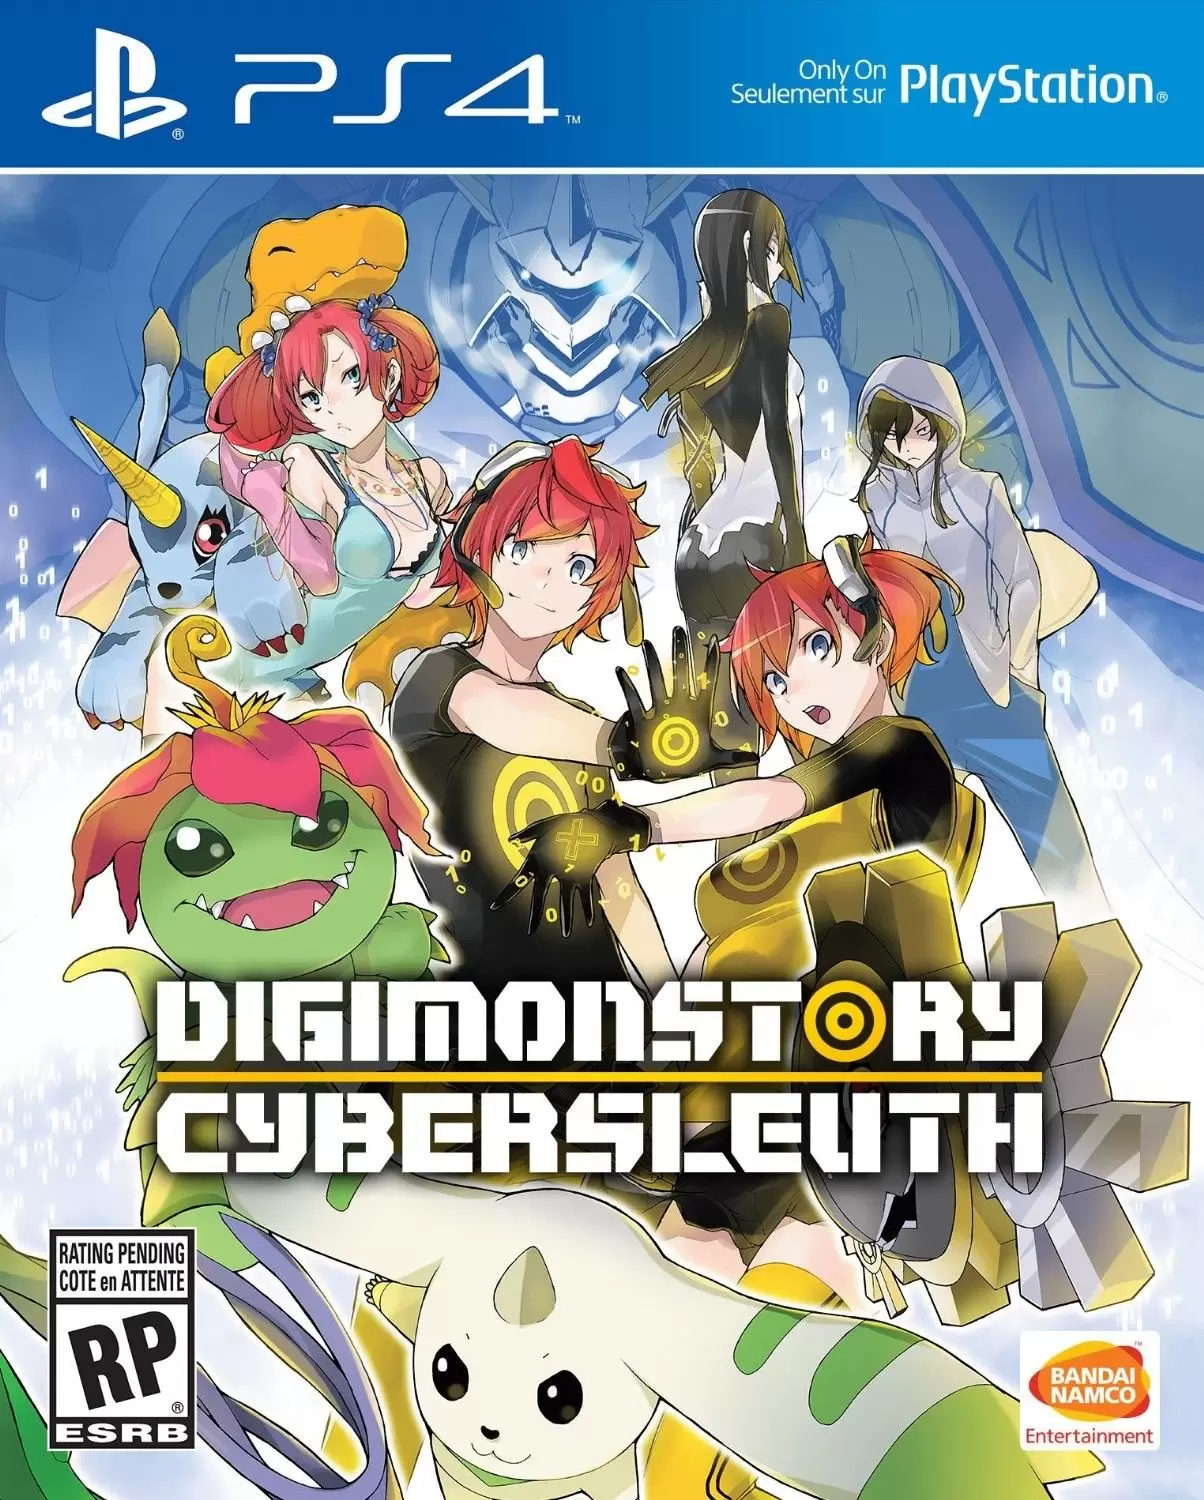 PS4 Games - Digimon Story: Cyber Sleuth